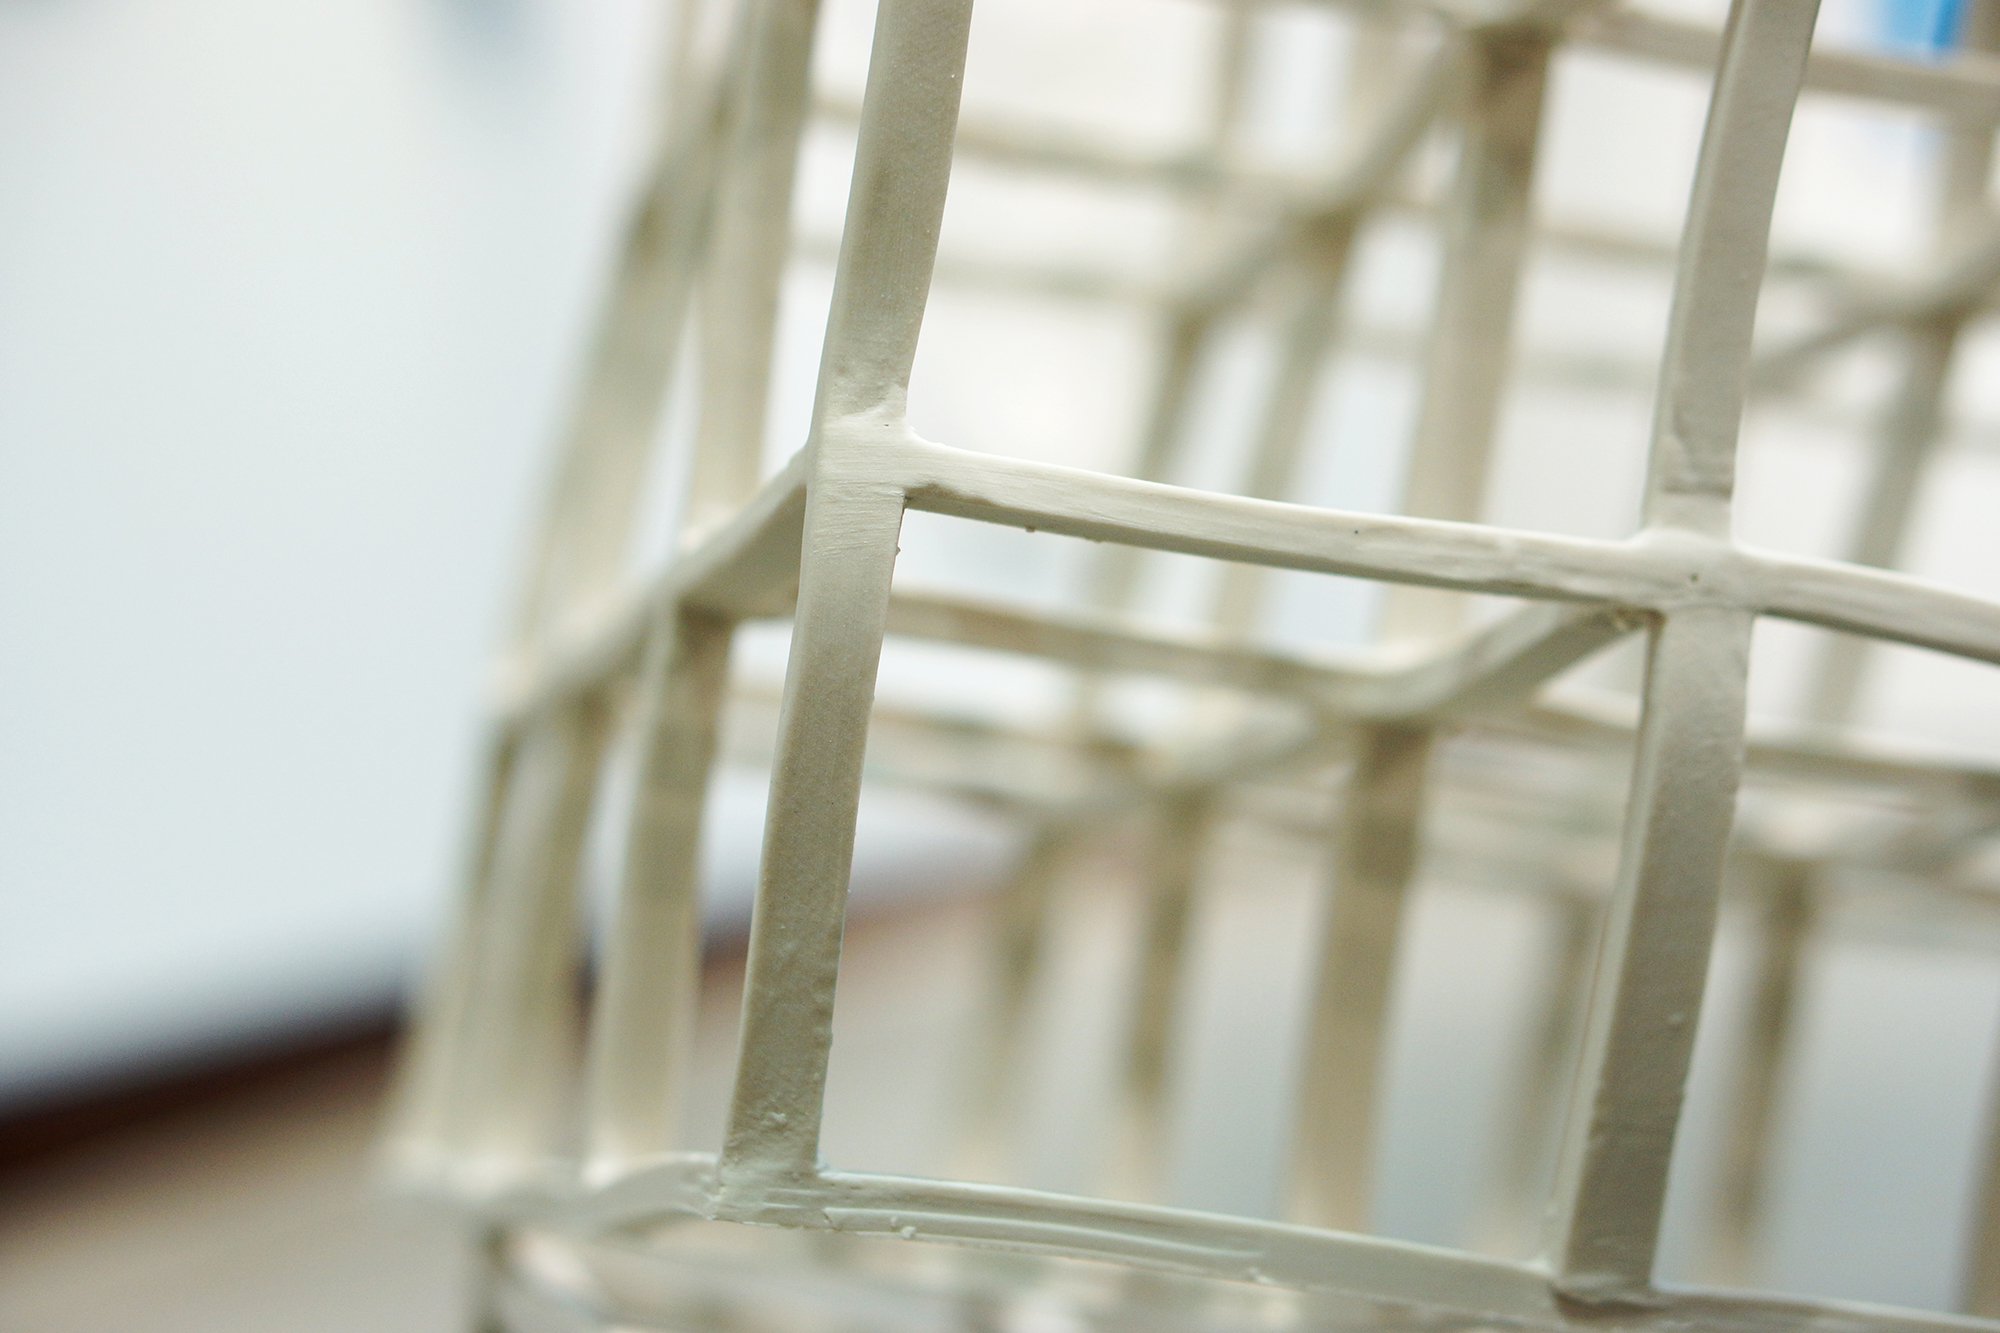  Close up image of free standing grid sculpture created by Lauren HB Studio available for commission and display 